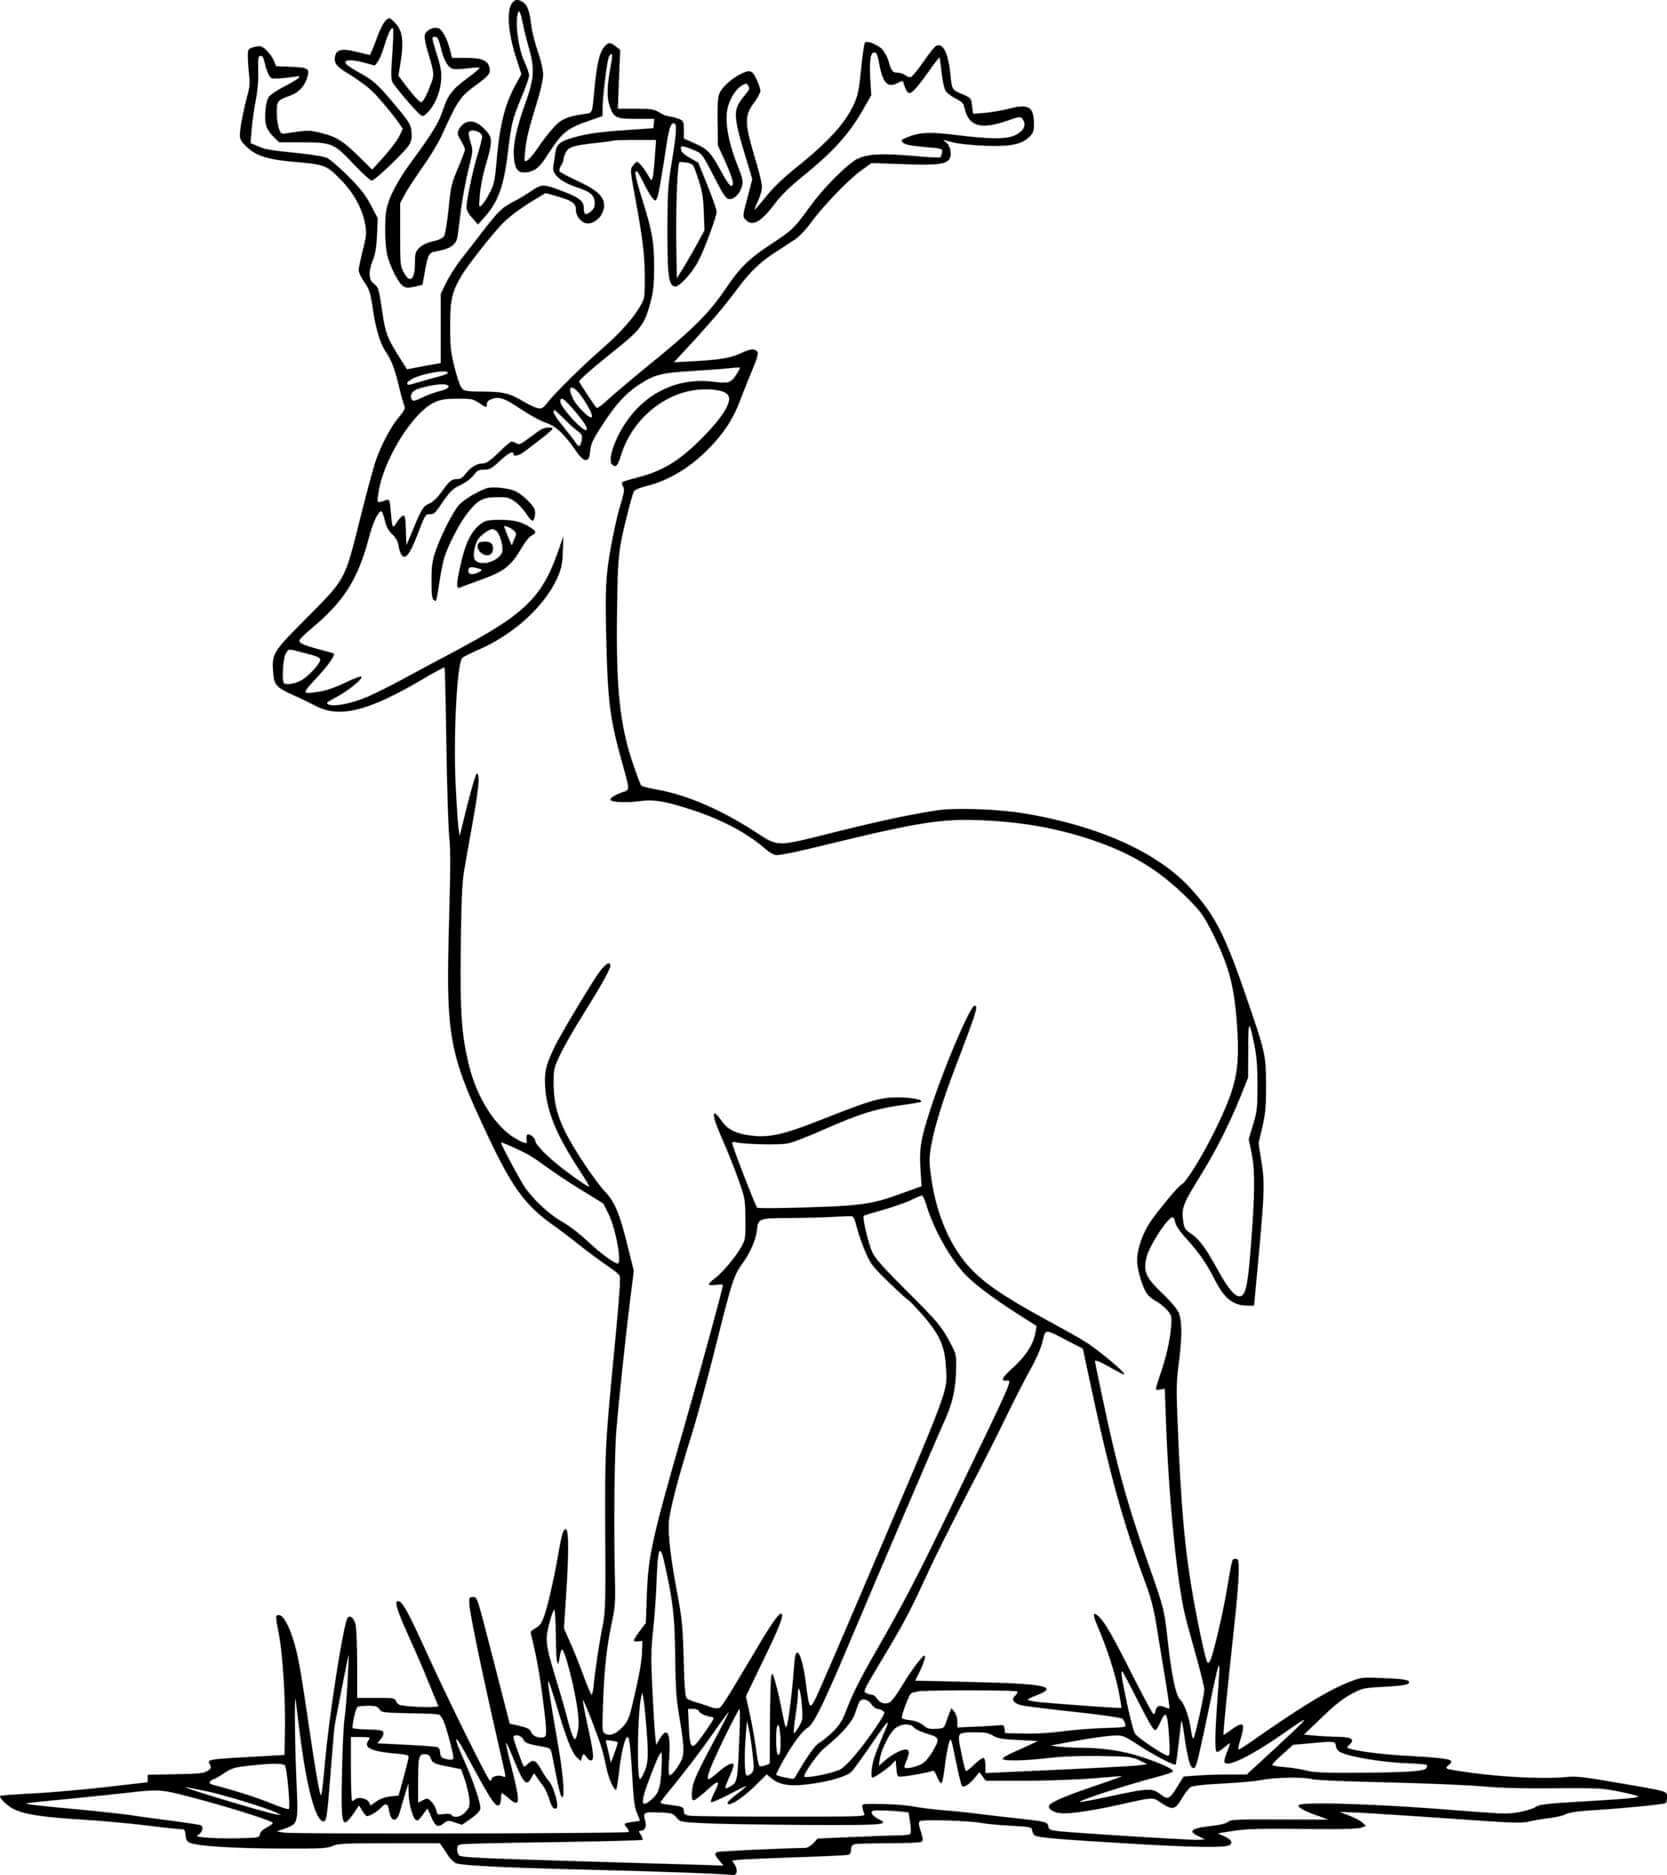 Little Deer On The Grass Coloring Page